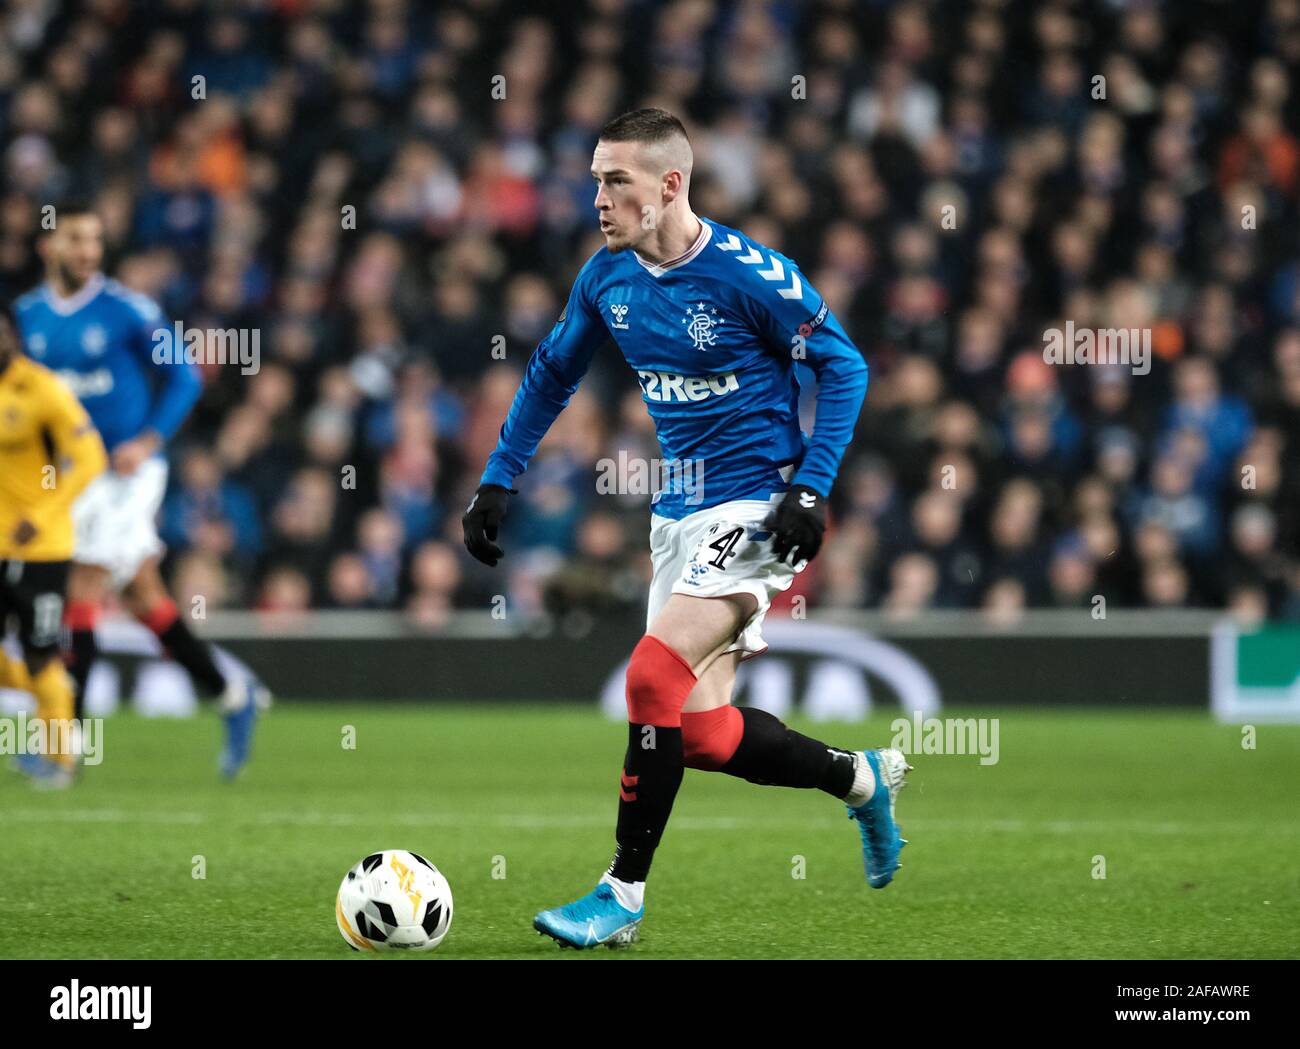 GLASGOW, SCOTLAND - DECEMBER 12:  Ryan Kent during the UEFA Europa League group G match between Rangers FC and BSC Young Boys at Ibrox Stadium on December 12, 2019 in Glasgow, United Kingdom. (MB Media) Stock Photo